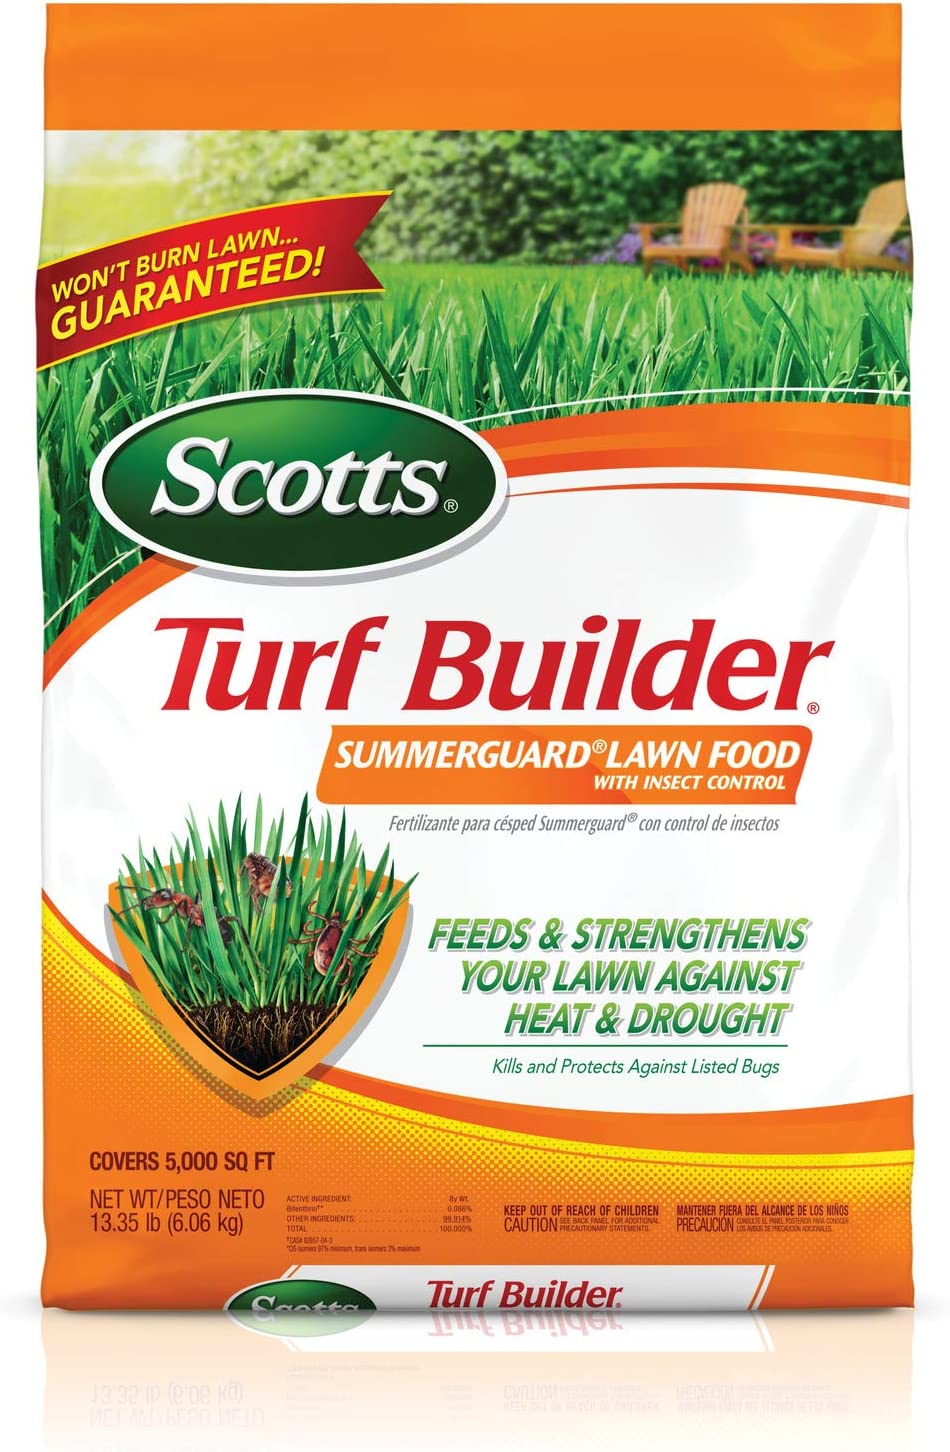 Scotts Turf Builder SummerGuard Lawn Food with Insect [...]